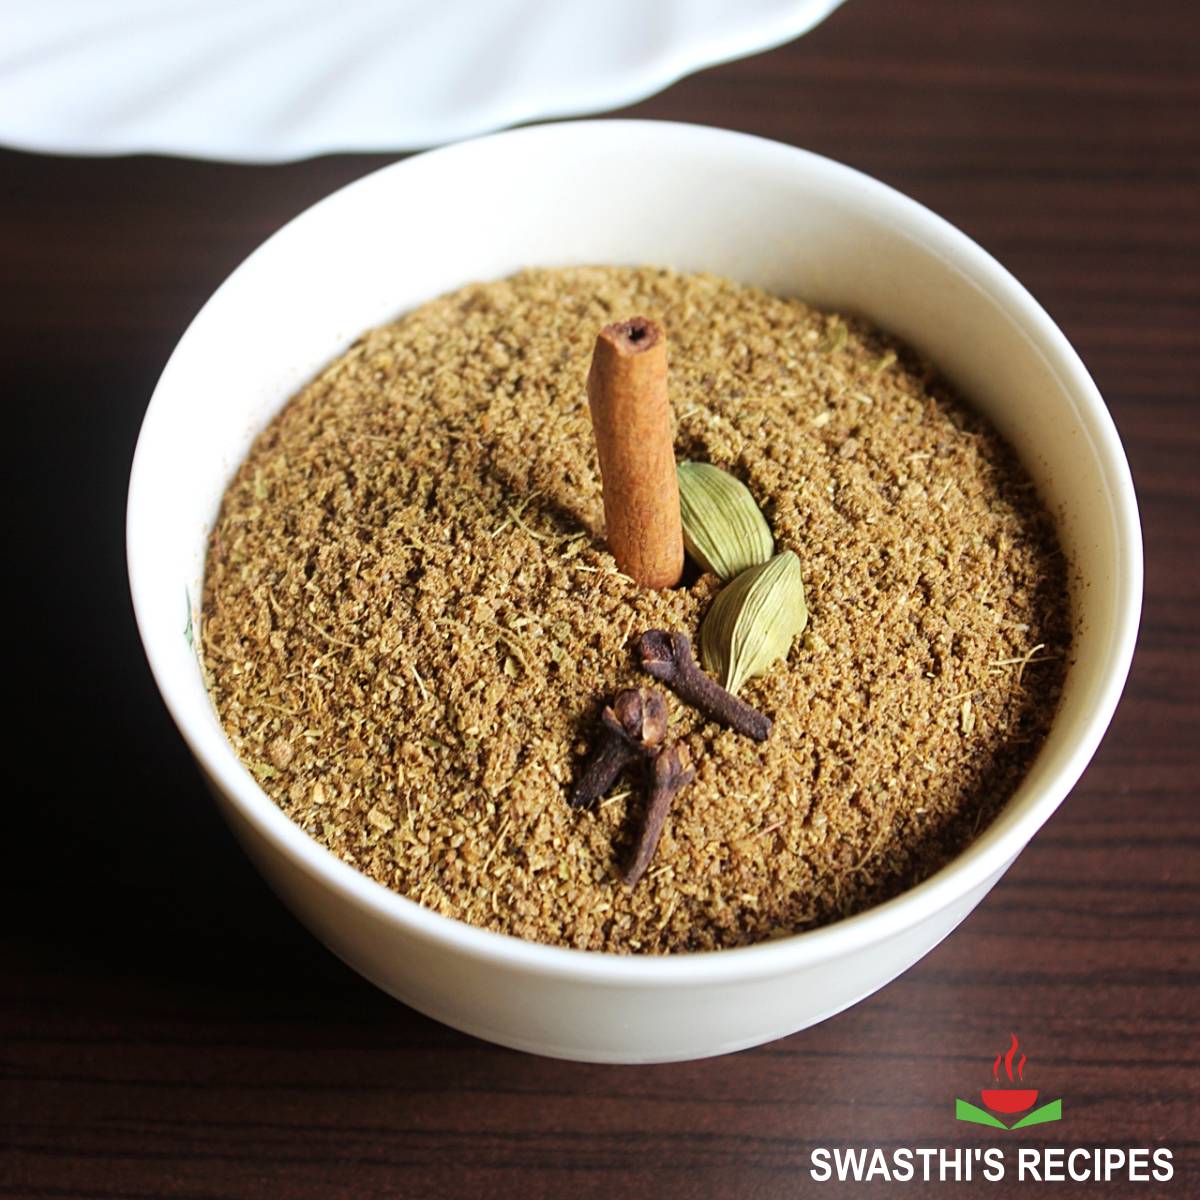 Garam masala recipe made with aromatic spices like cumin, cloves and many others